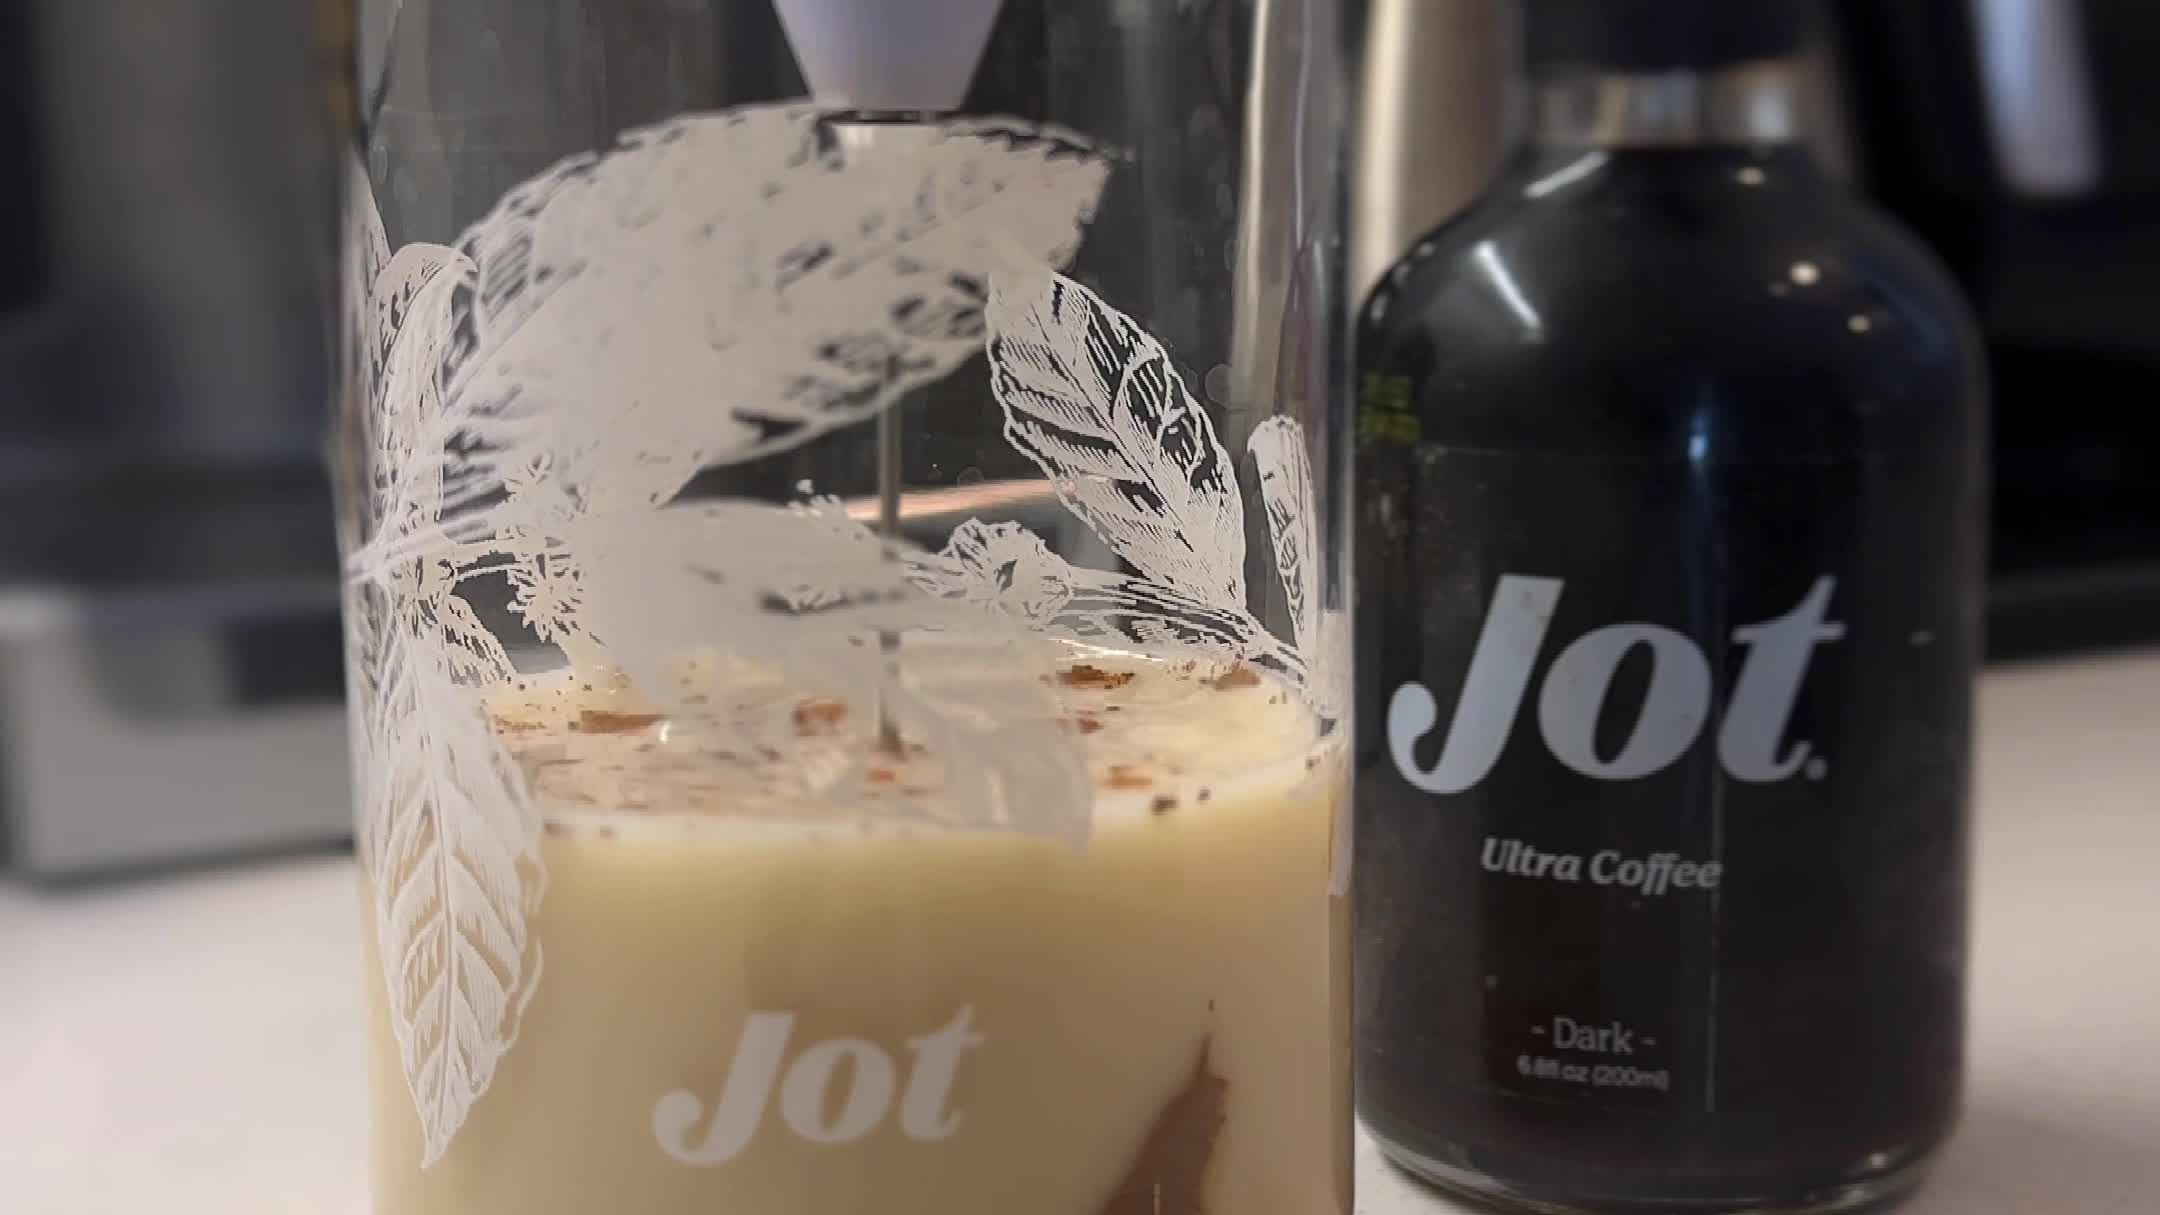 My Jot Review—I Swapped My Usual Brew for This Coffee Concentrate